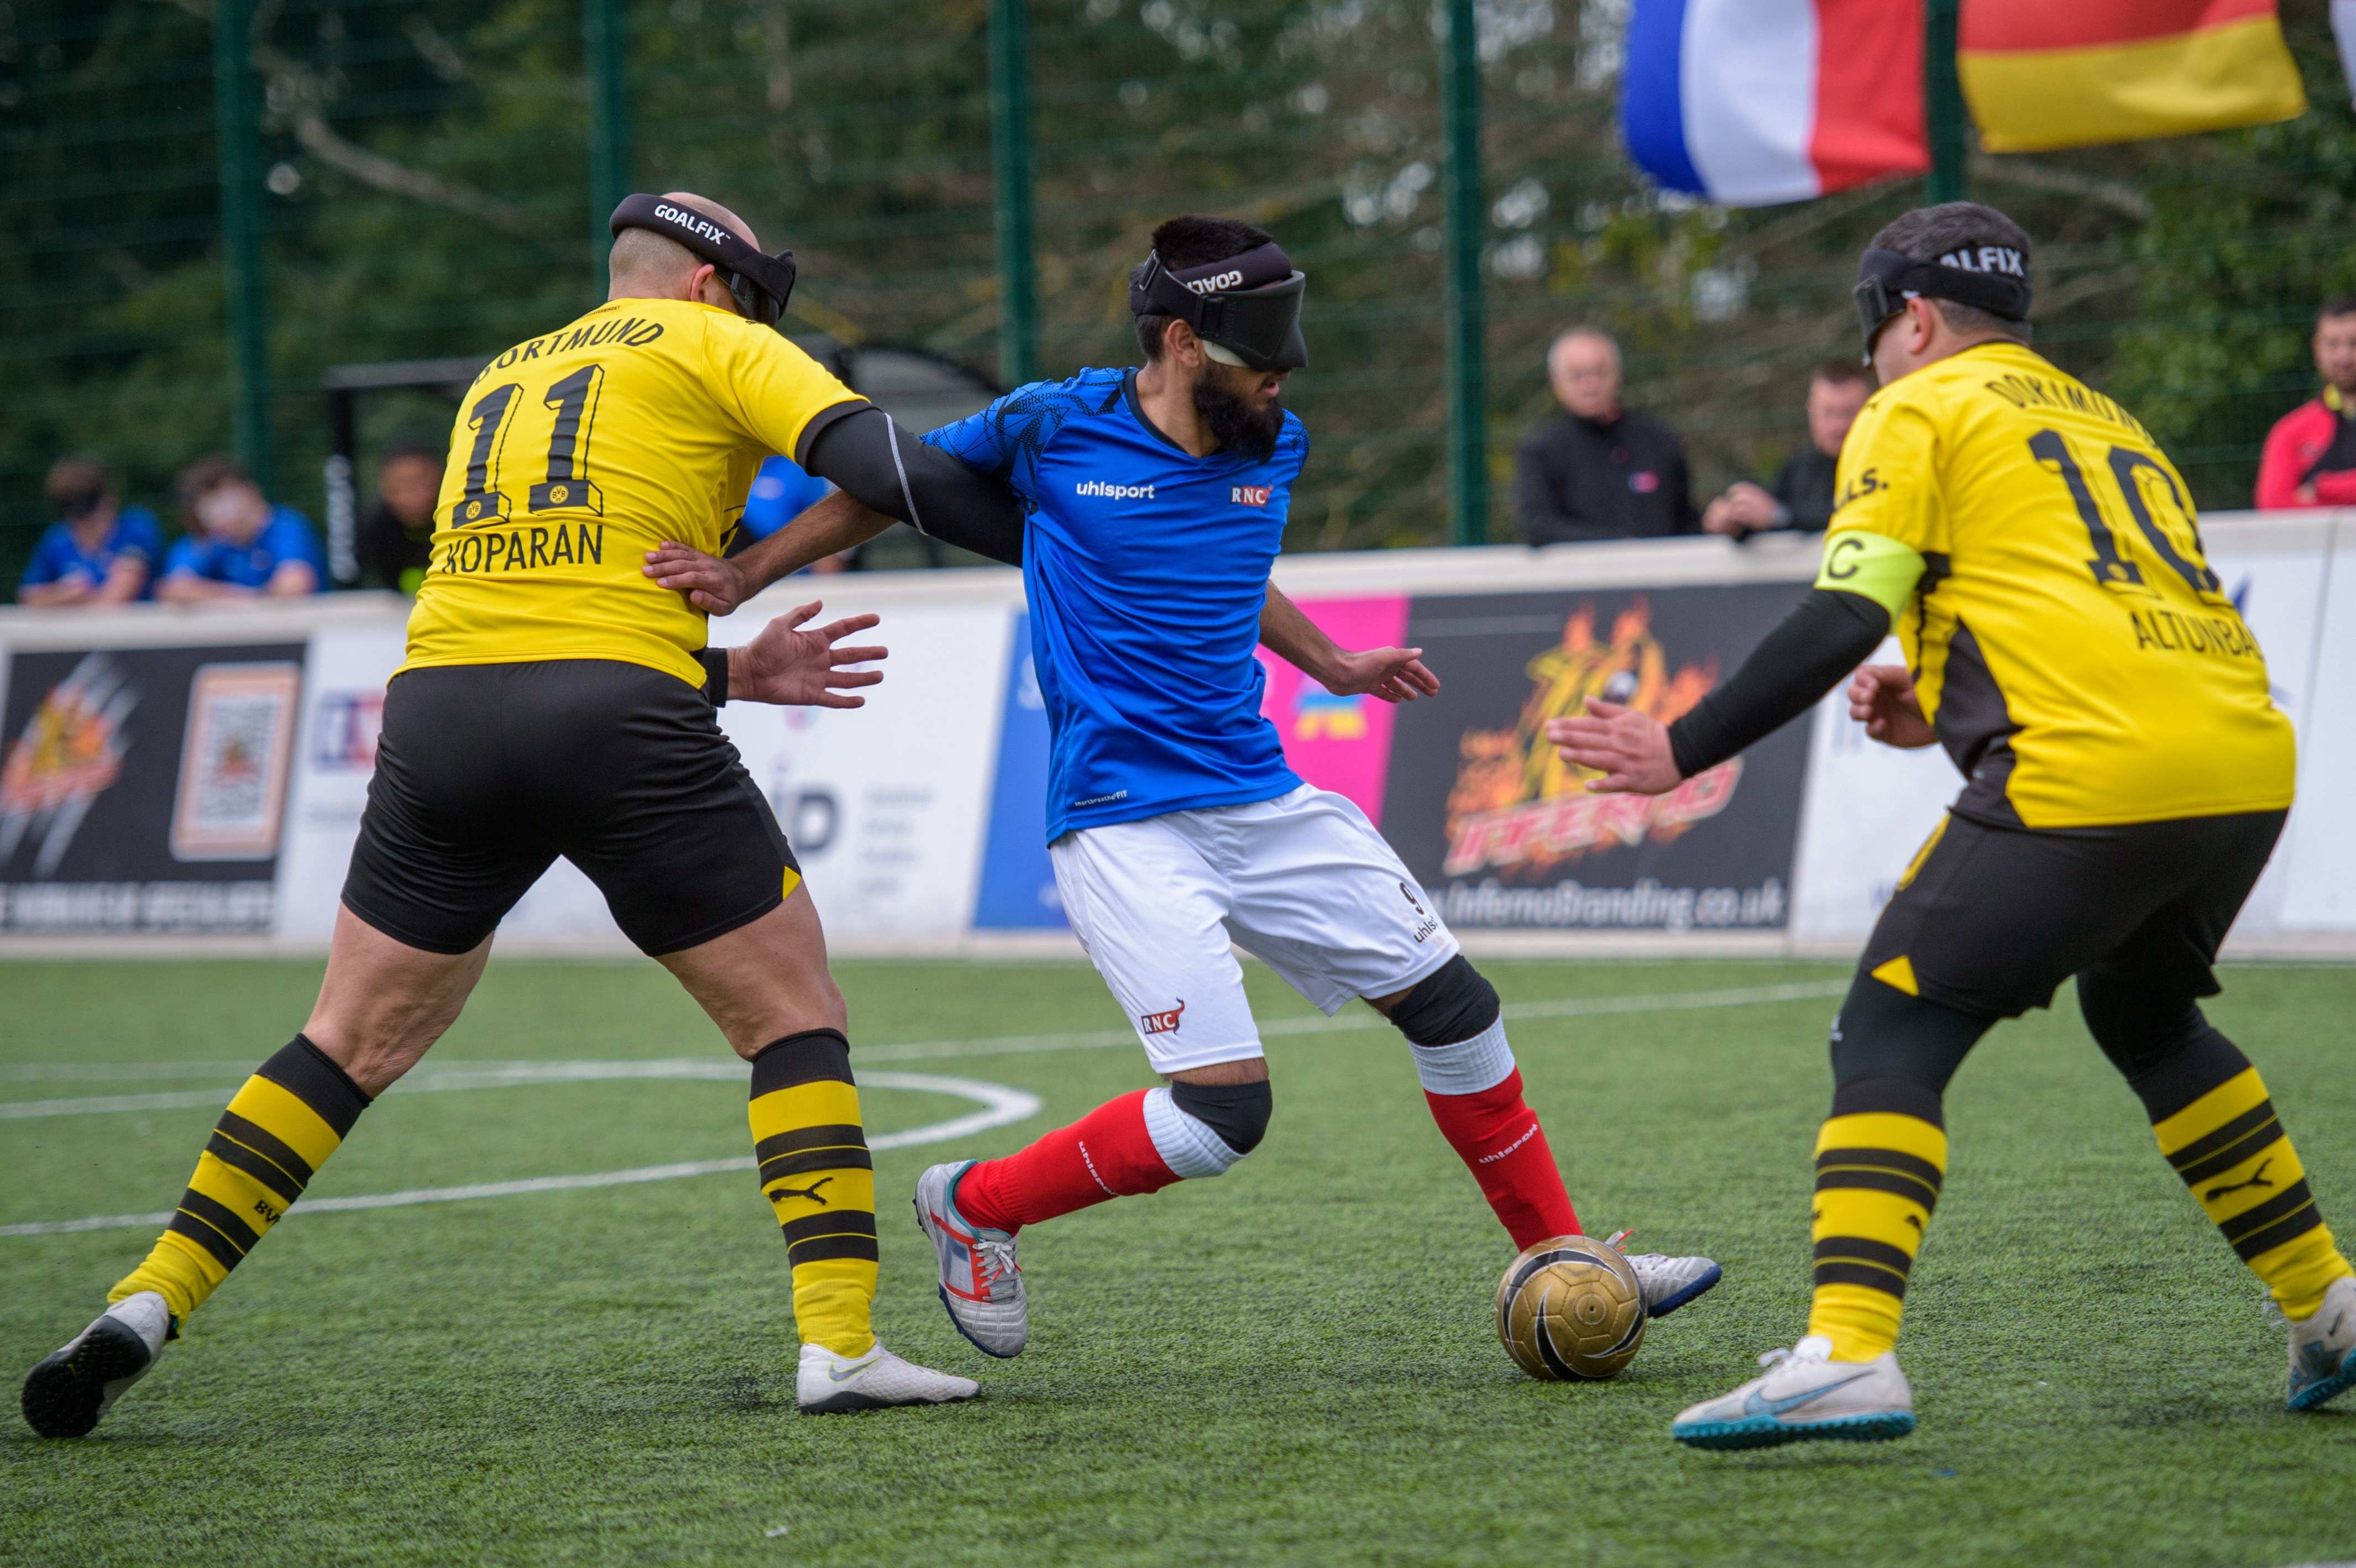 RNC continues to dominate in European Blind Football League